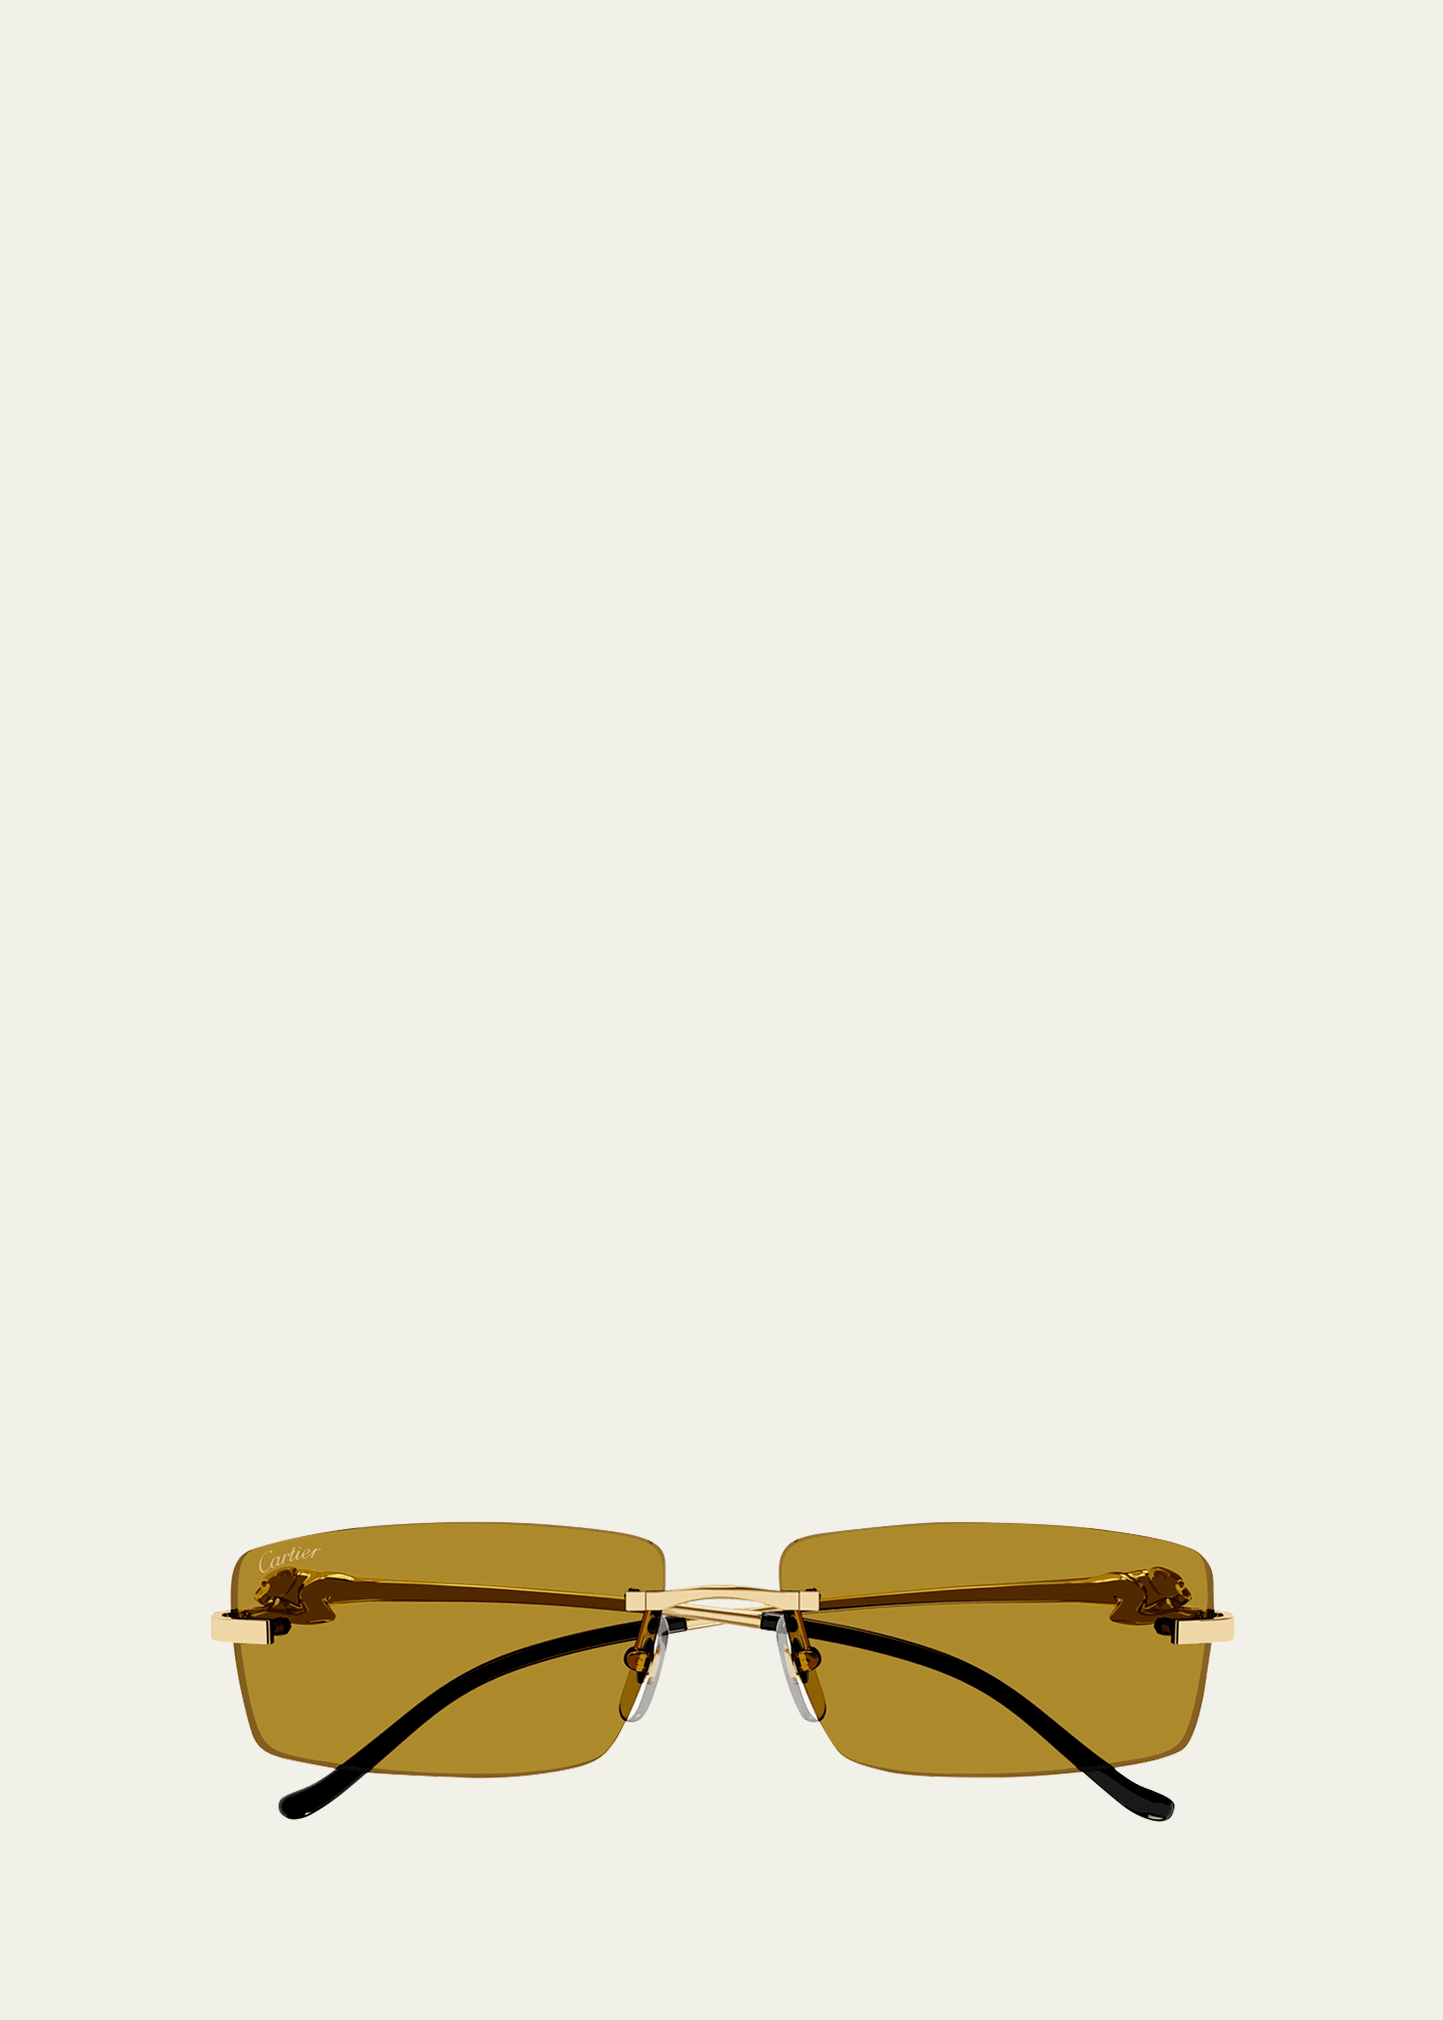 Cartier Men's Rimless Metal Rectangle Sunglasses In 003 Yellow Gold